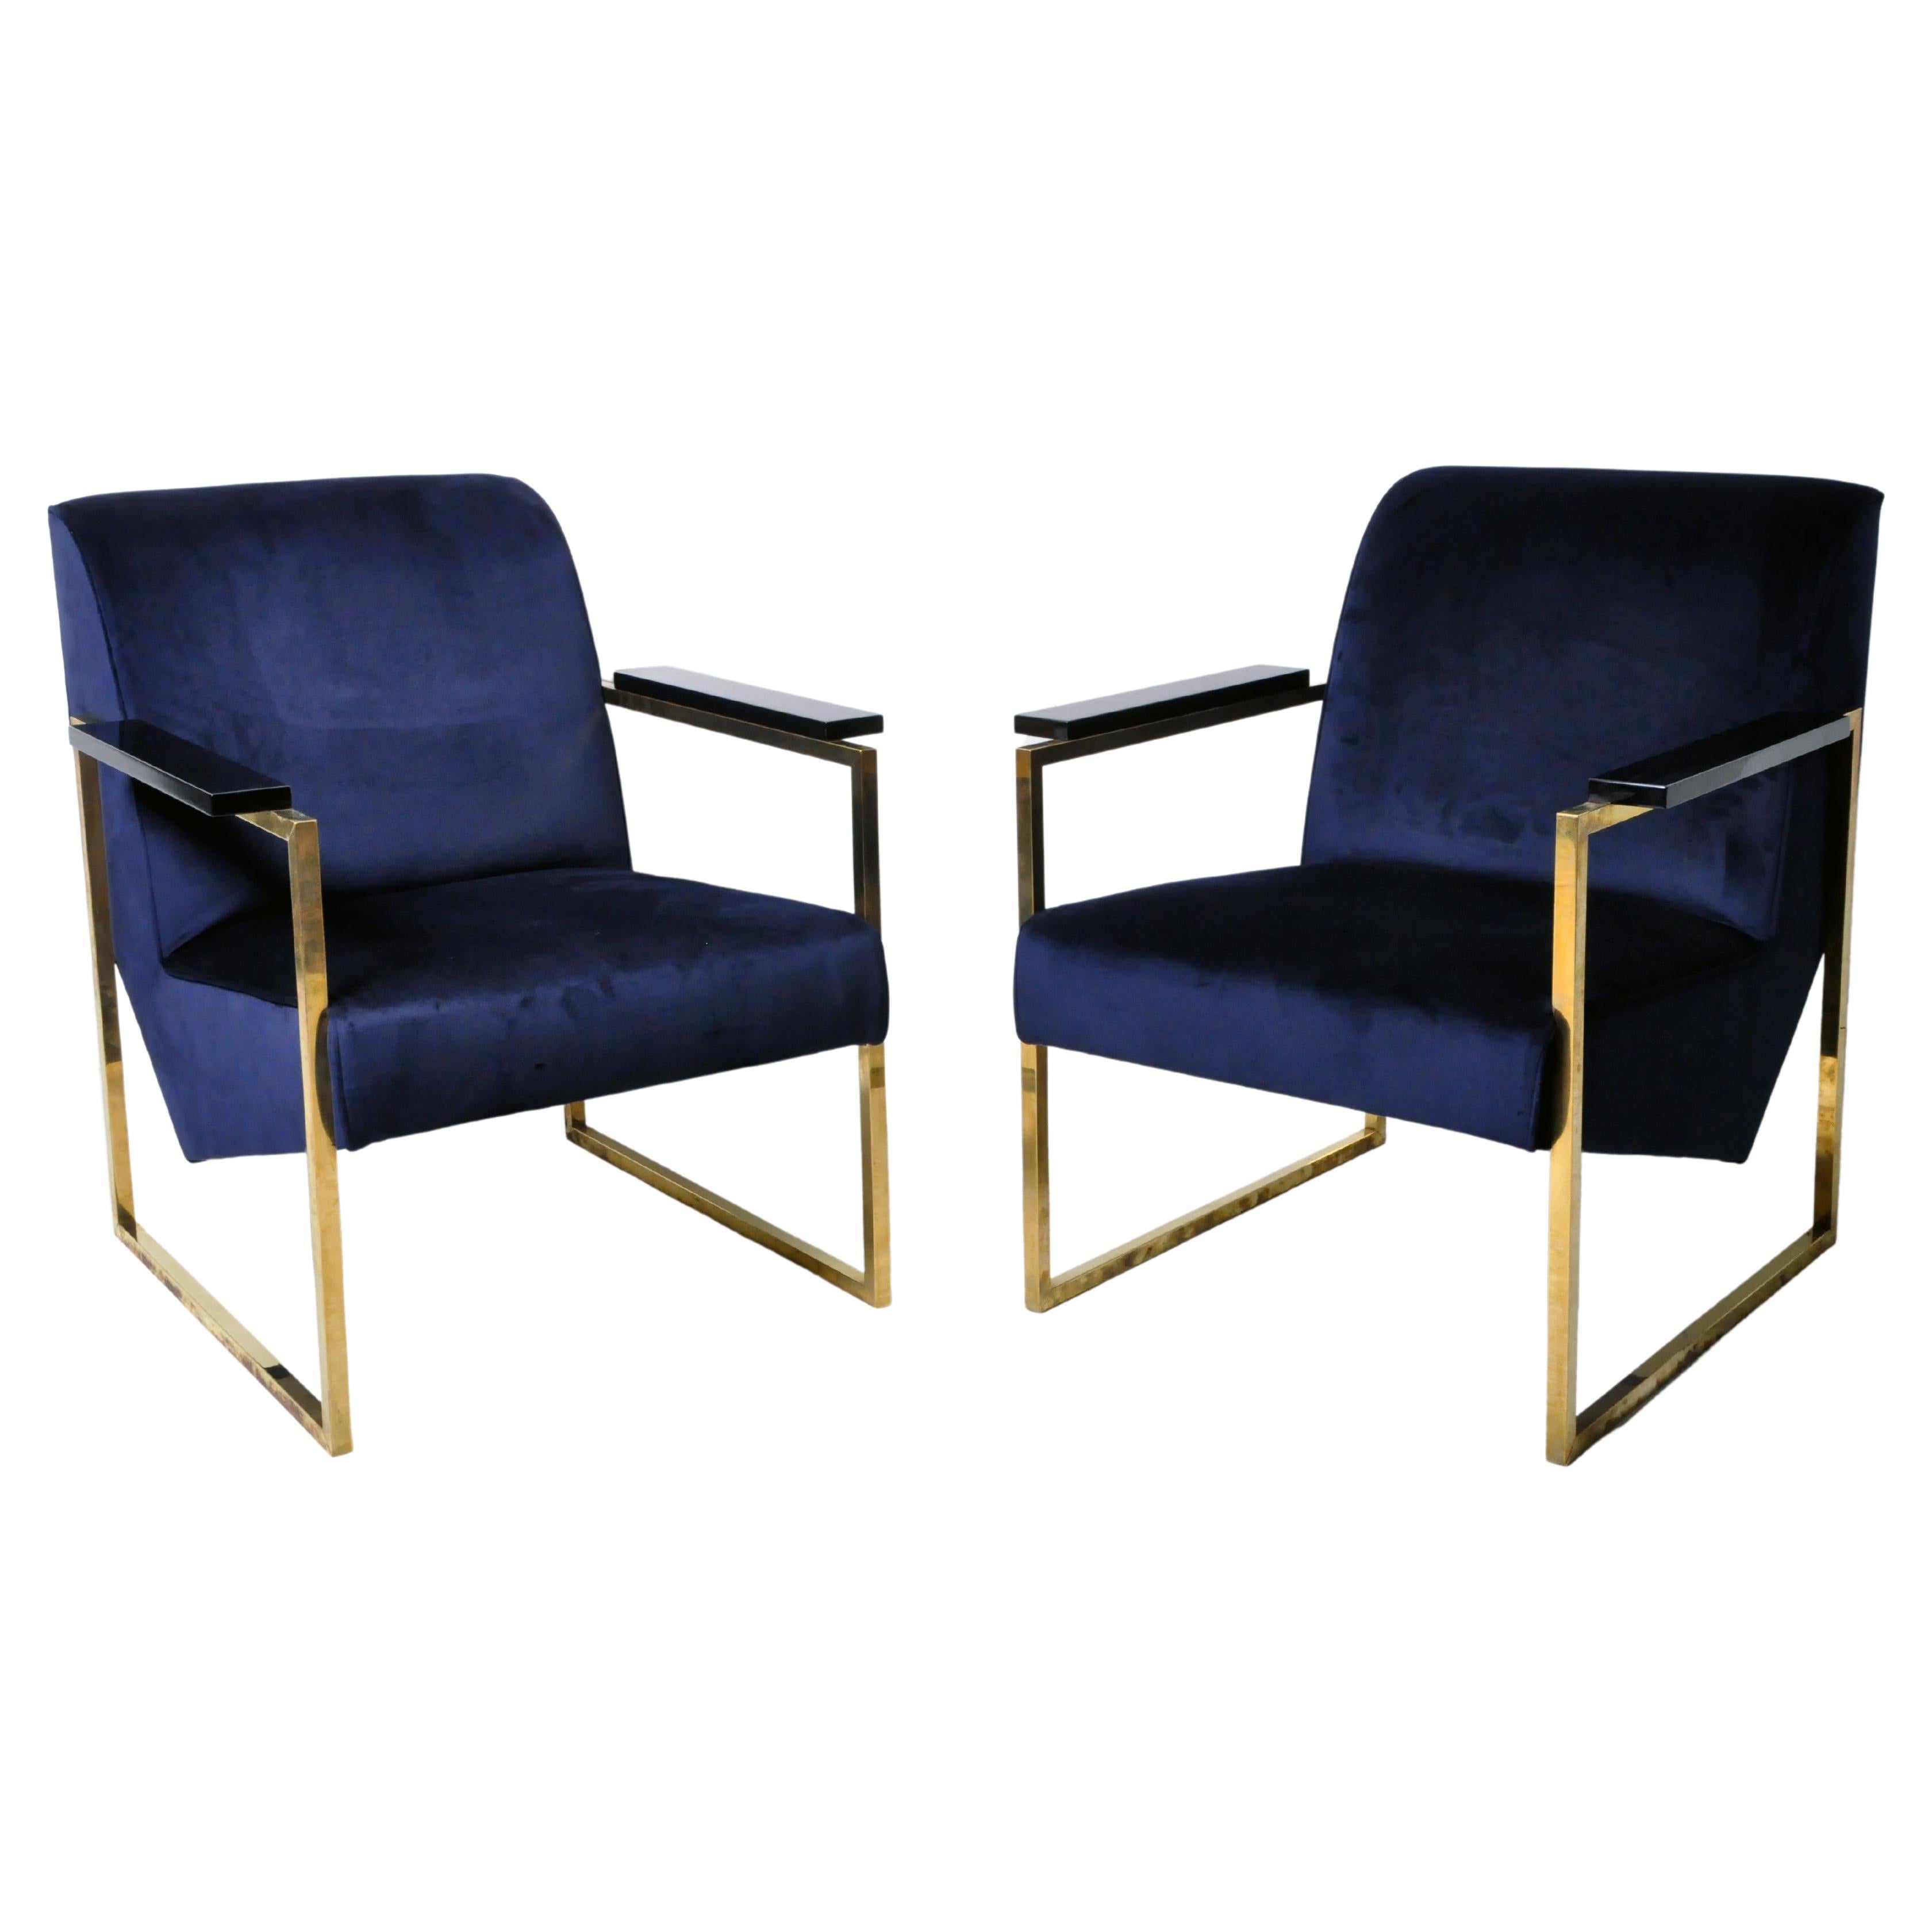 Pair of Brutalist Lounge Chairs with Brass Arms